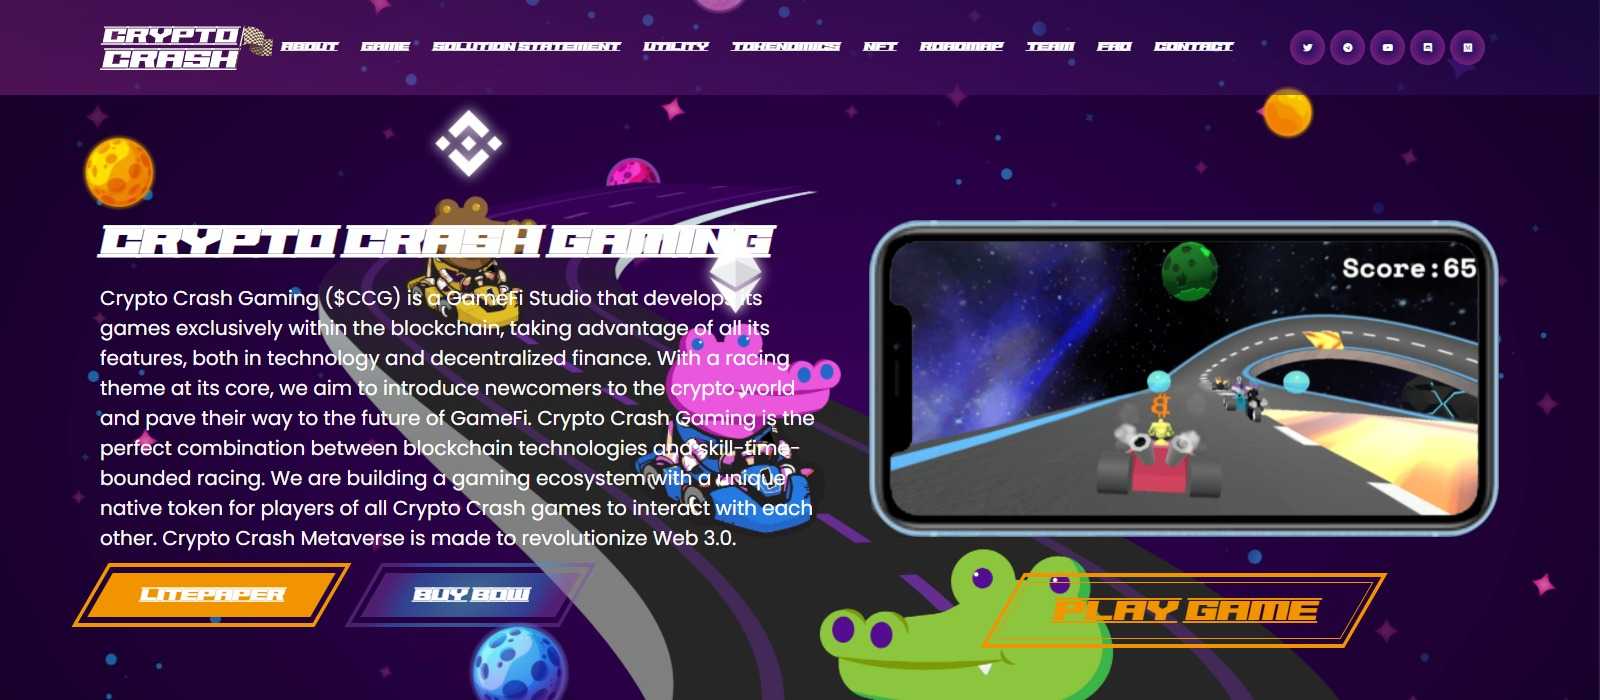 What Is Crypto Crash Gaming(CCG)? Complete Guide & Review About Crypto Crash Gaming